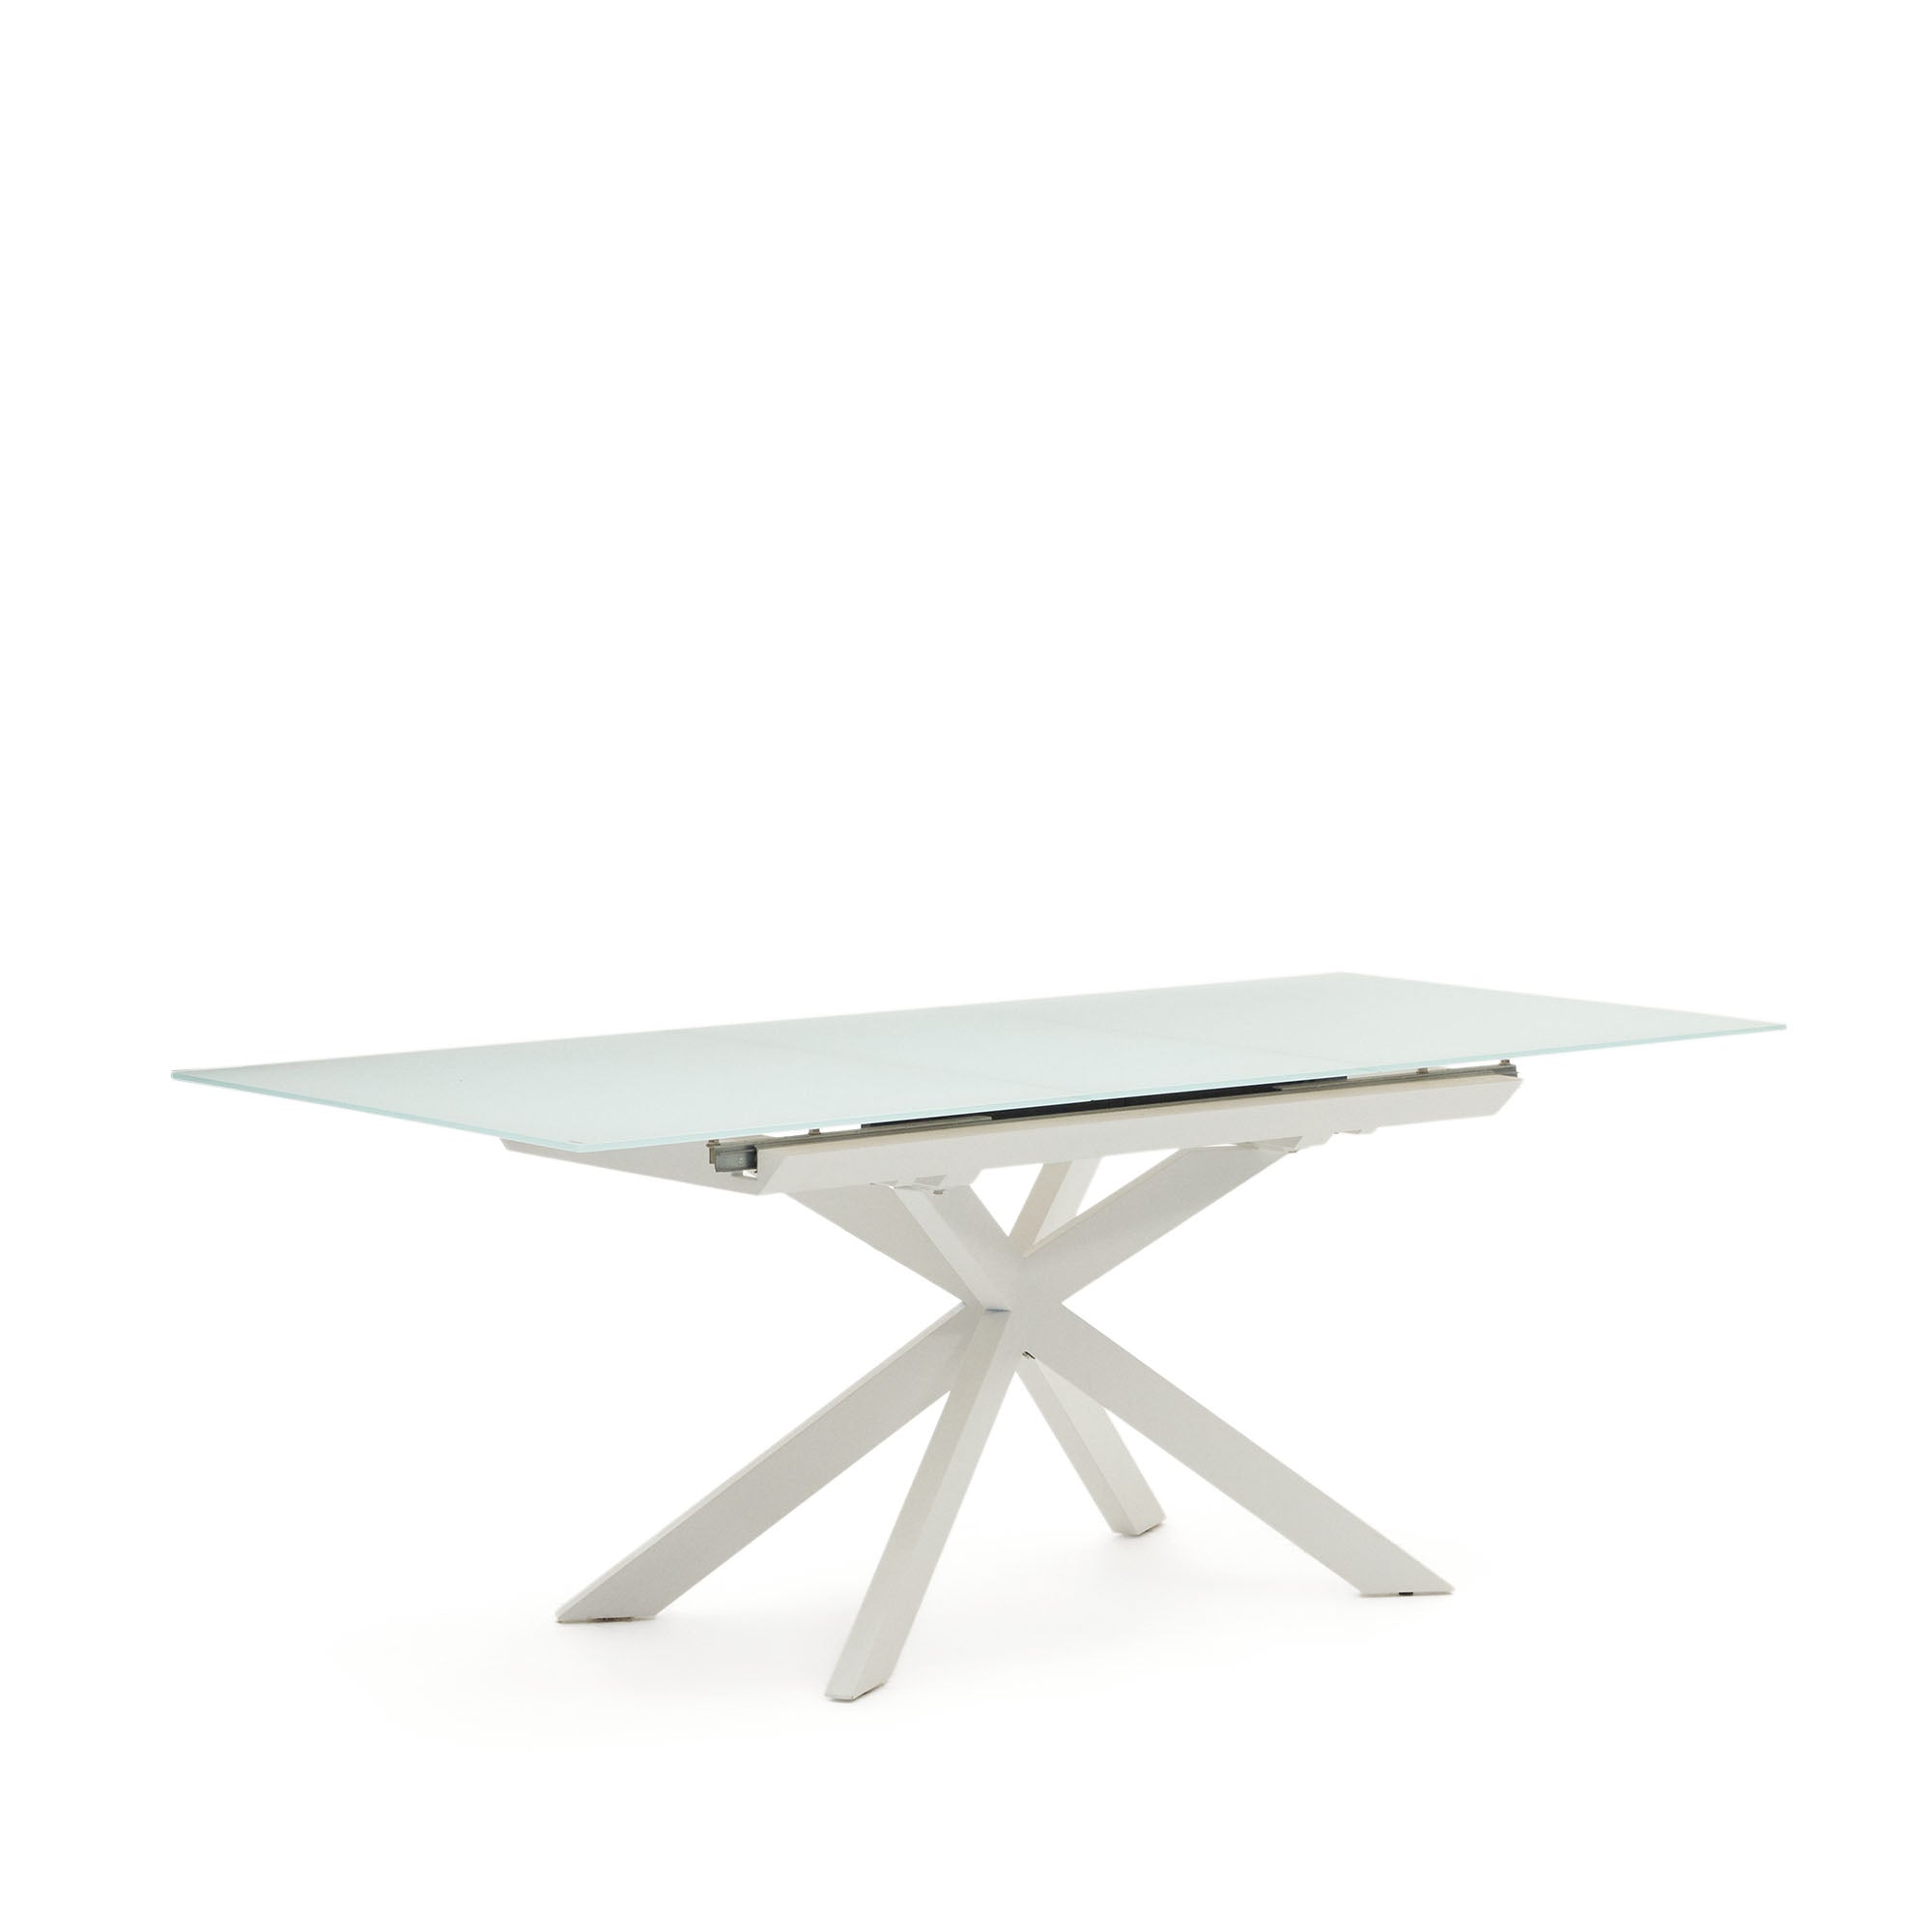 Vashti extendable round table in glass and MDF with steel legs in white, 160 (210) x 90 cm